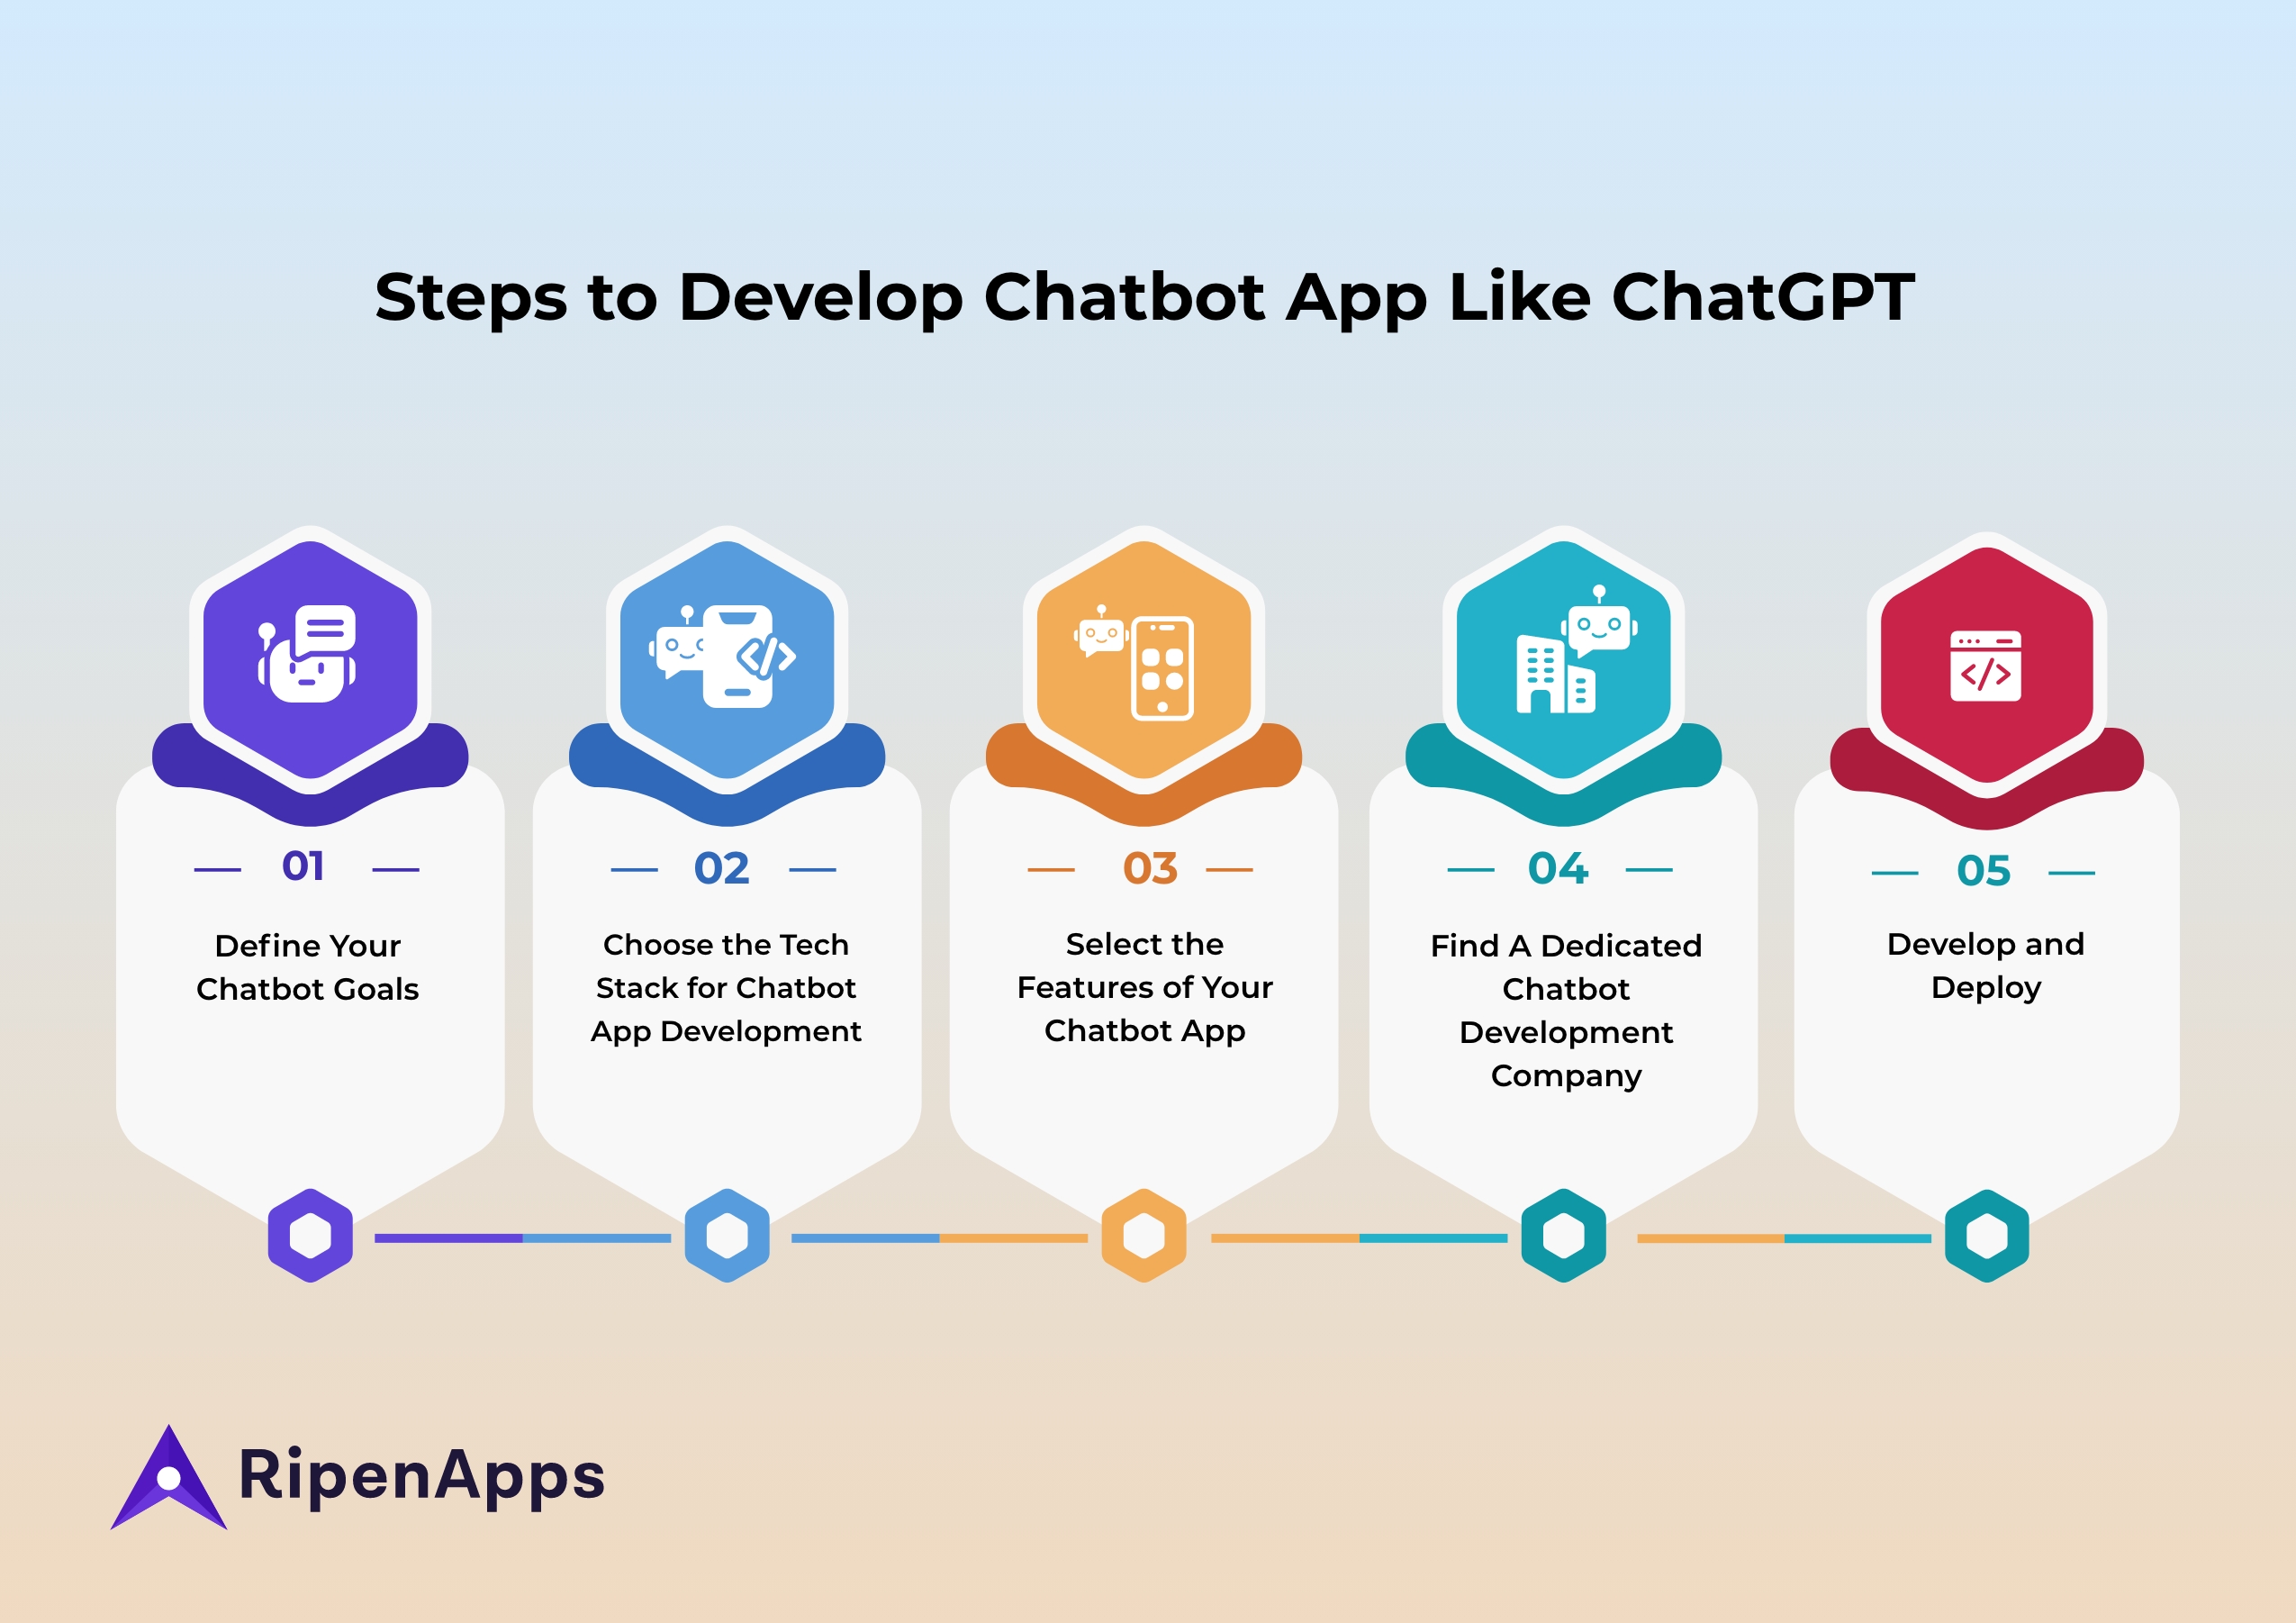 How to Develop a Chatbot Mobile App Like ChatGPT?